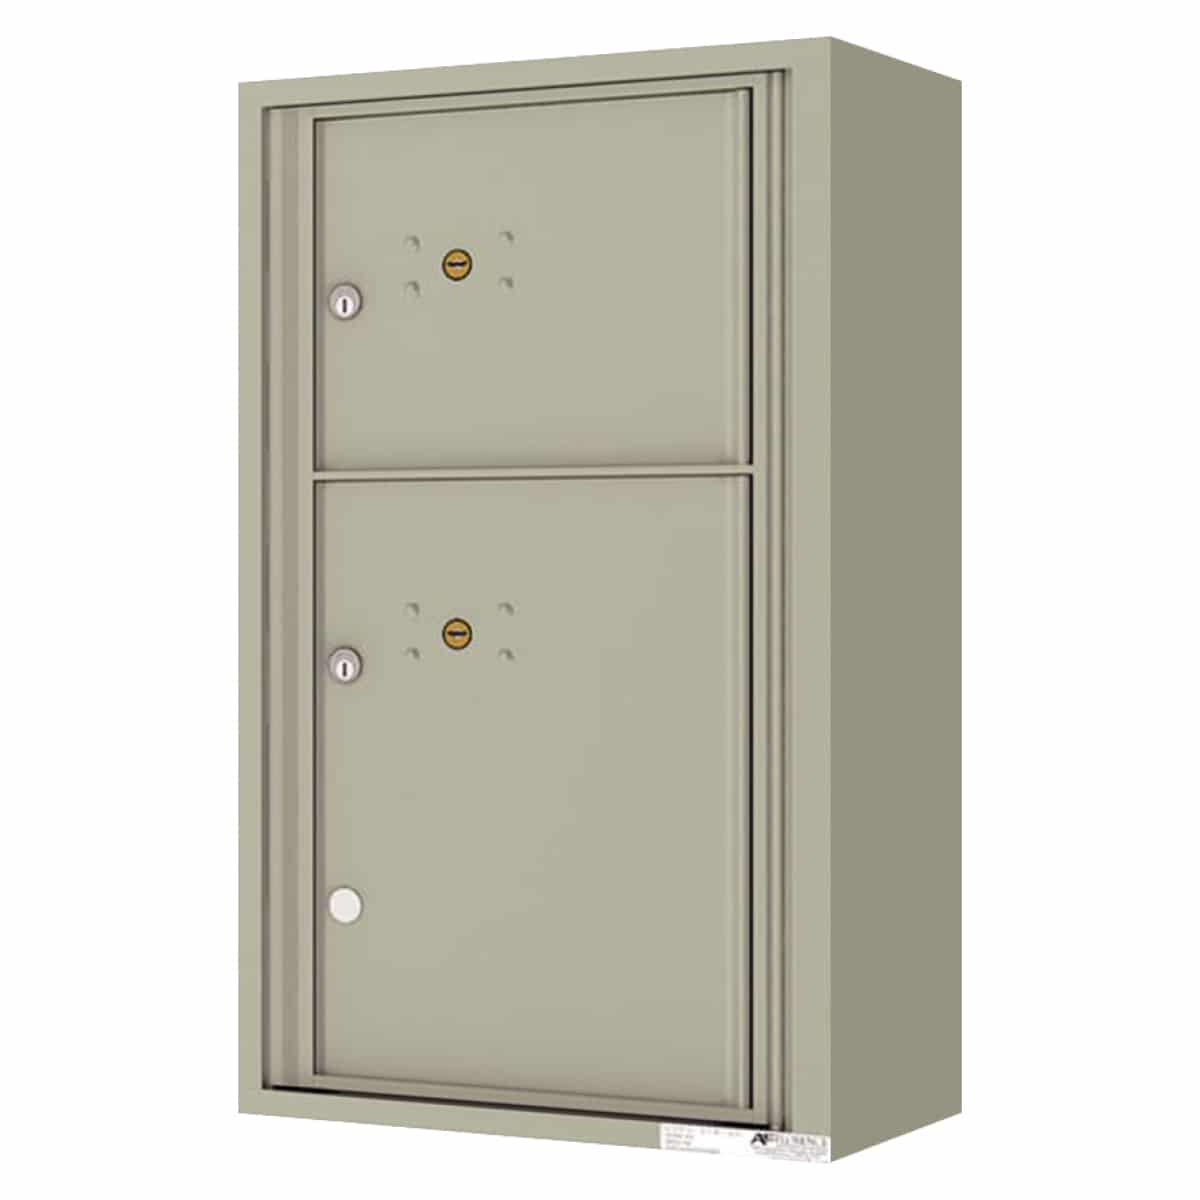 Surface Mount 4C Horizontal Mailbox – 2 Parcel Lockers – Front Loading – 4C08S-2P-SM Product Image